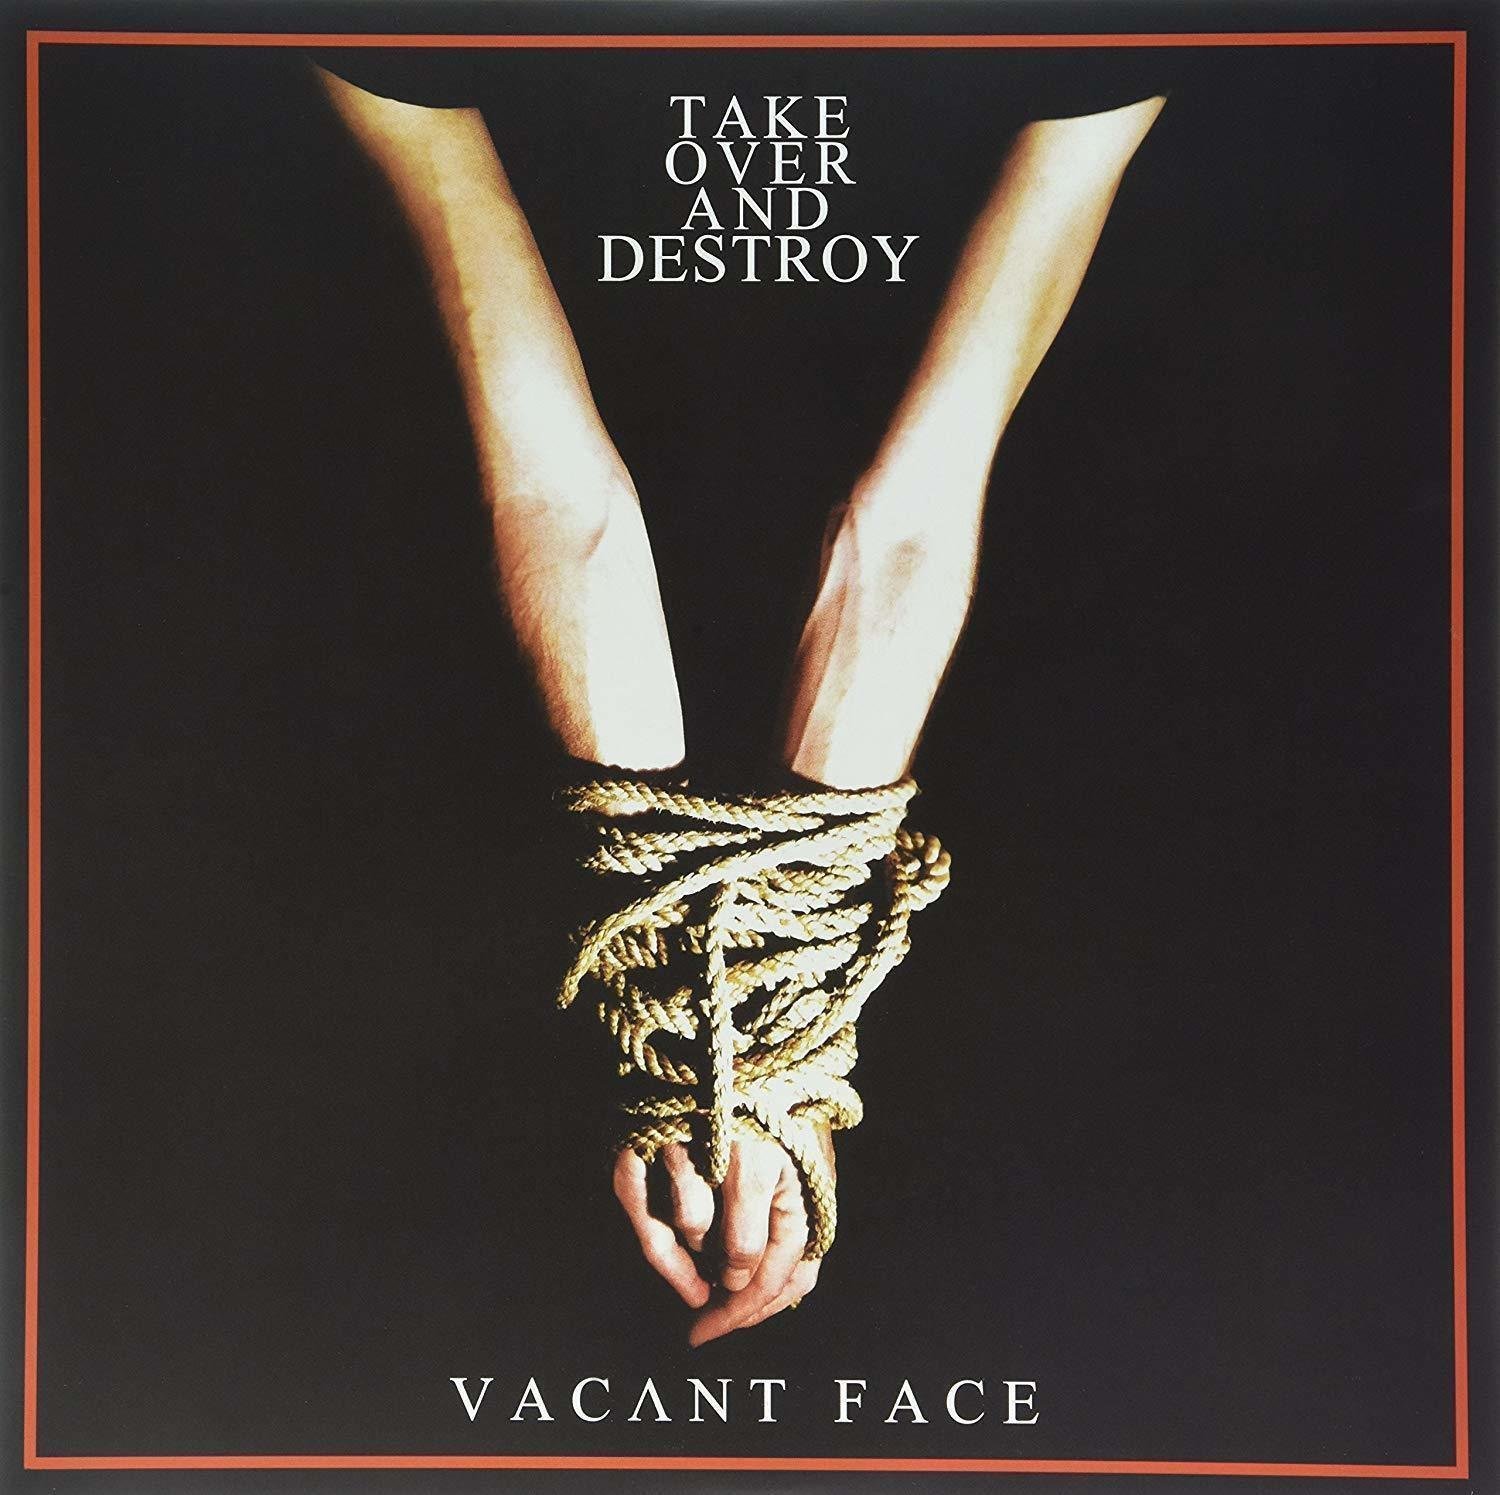 Vinyl Record Take Over And Destroy - Vacant Face (LP)